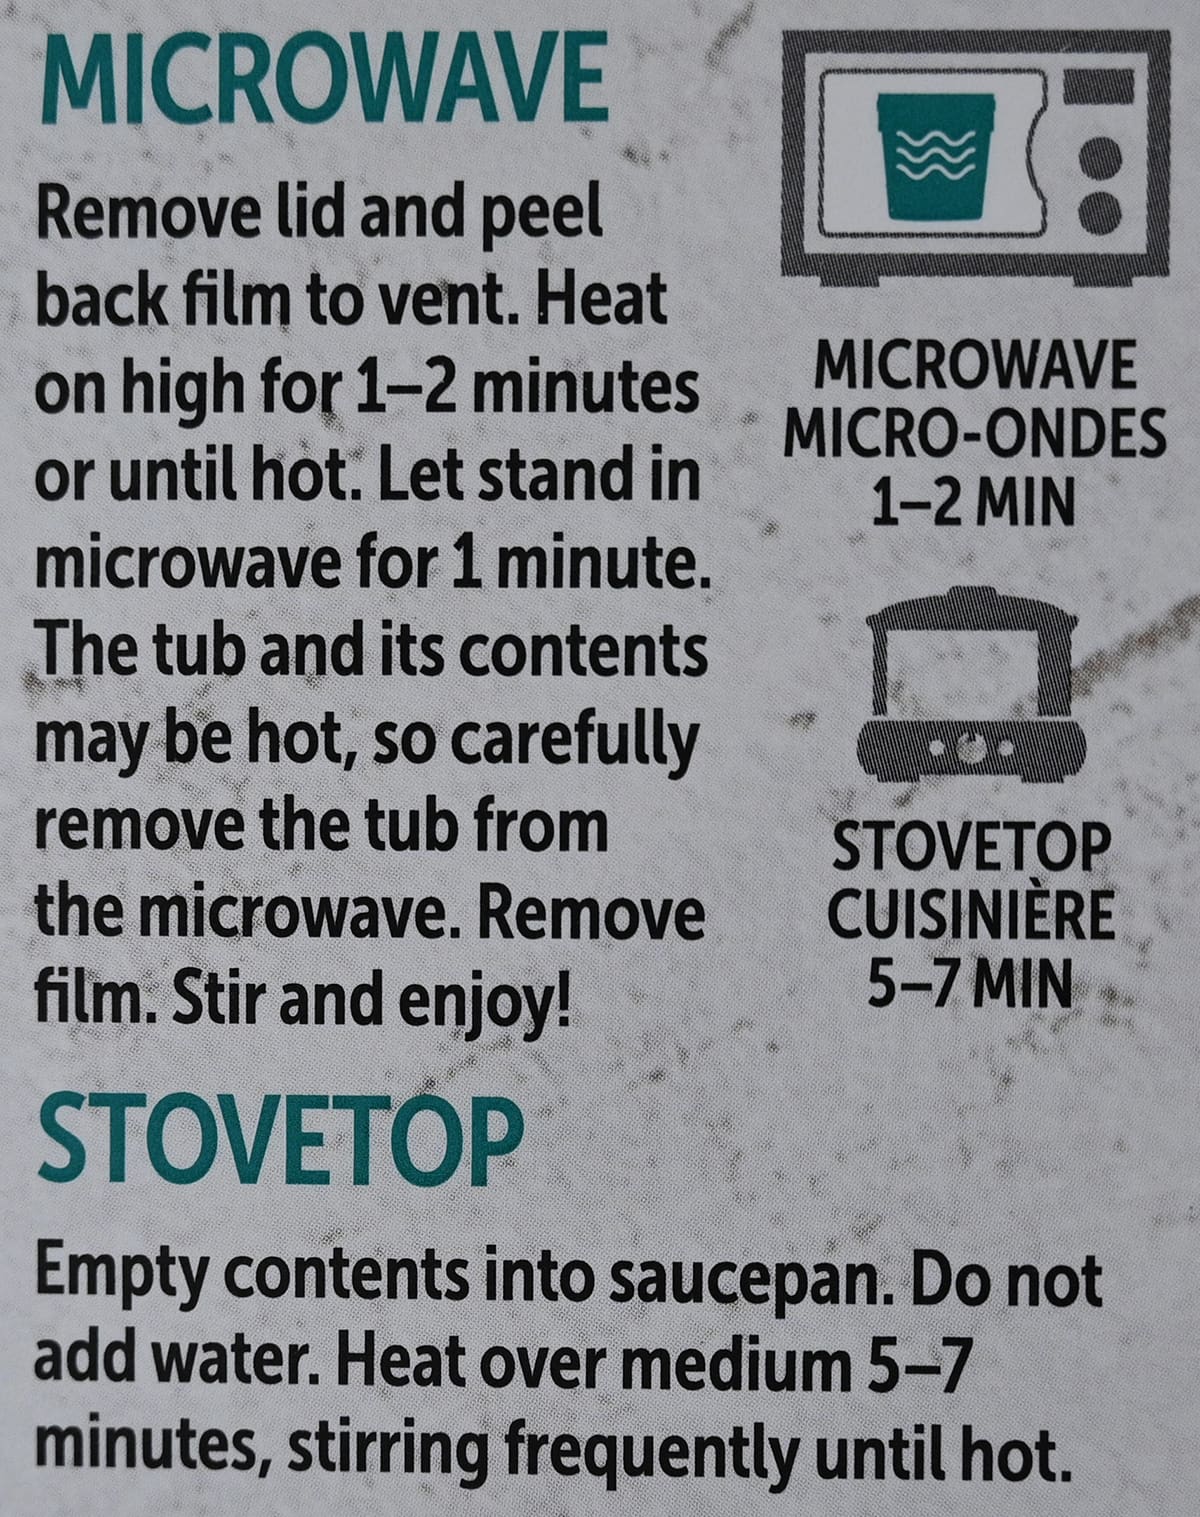 Closeup image of the heating instructions for the soup from the back of the box.